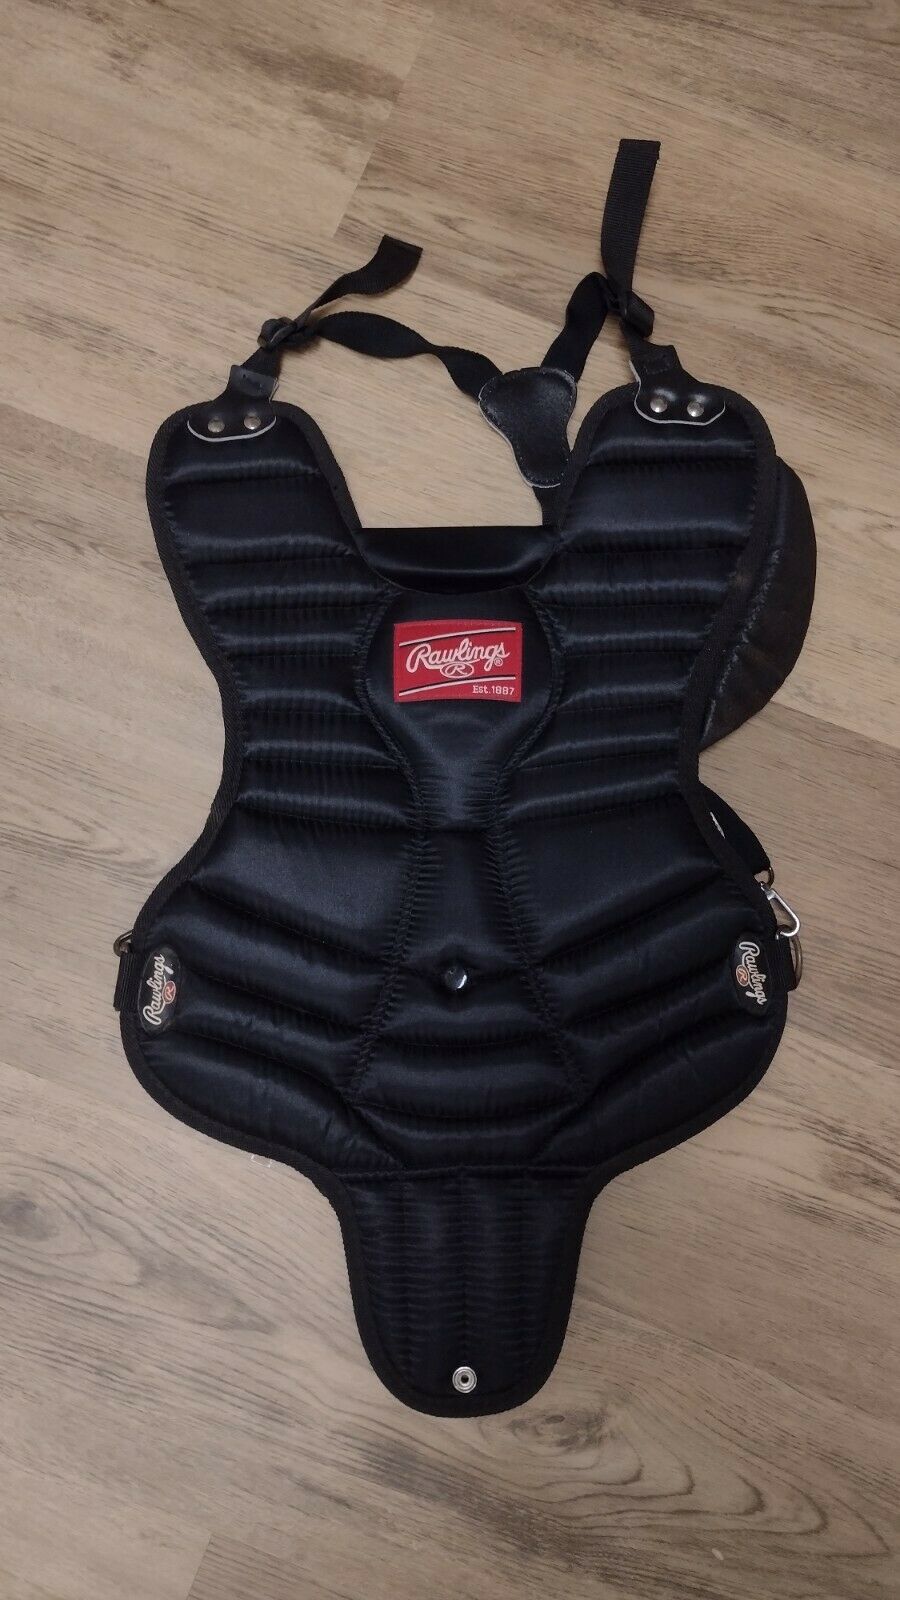 Rawlings Umpire Chest Guard Protector Baseball/softball Sz 8p-1 For Ages 7-9